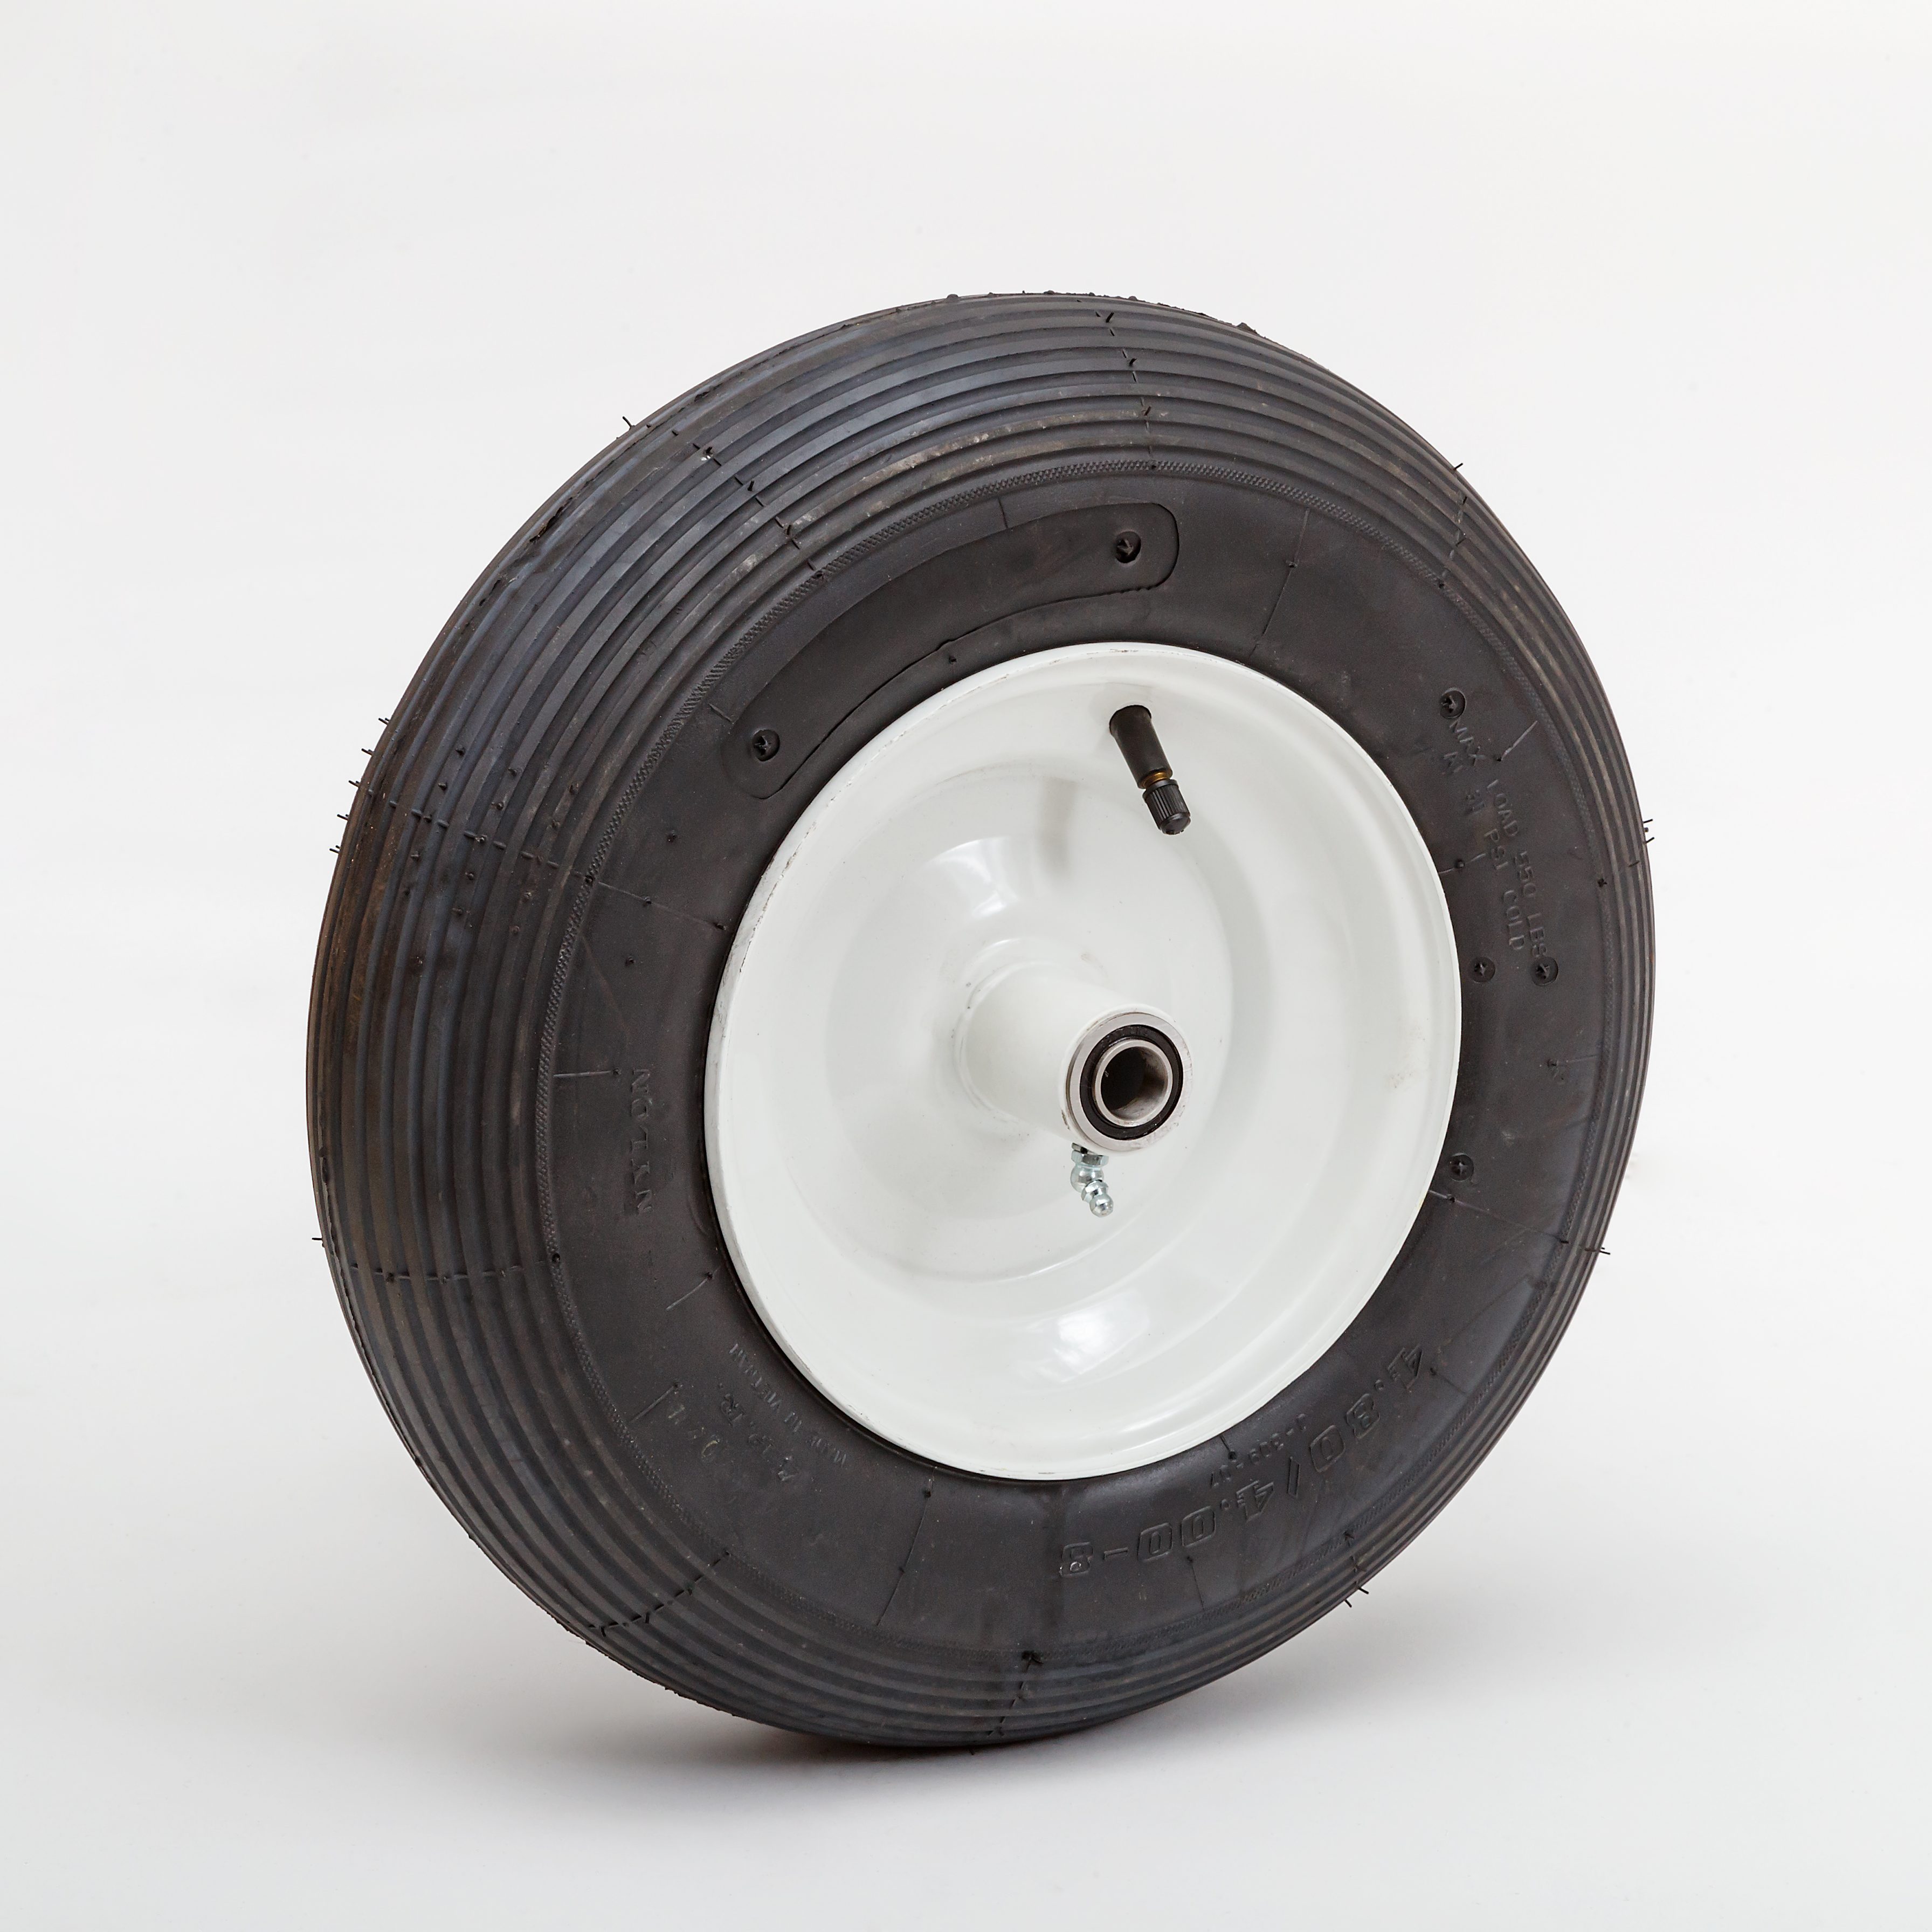 Wagon/Tricycle/Utility cart Replacement Lapp Wheels 15 Pneumatic Wheel White Turf 4 ply Tread